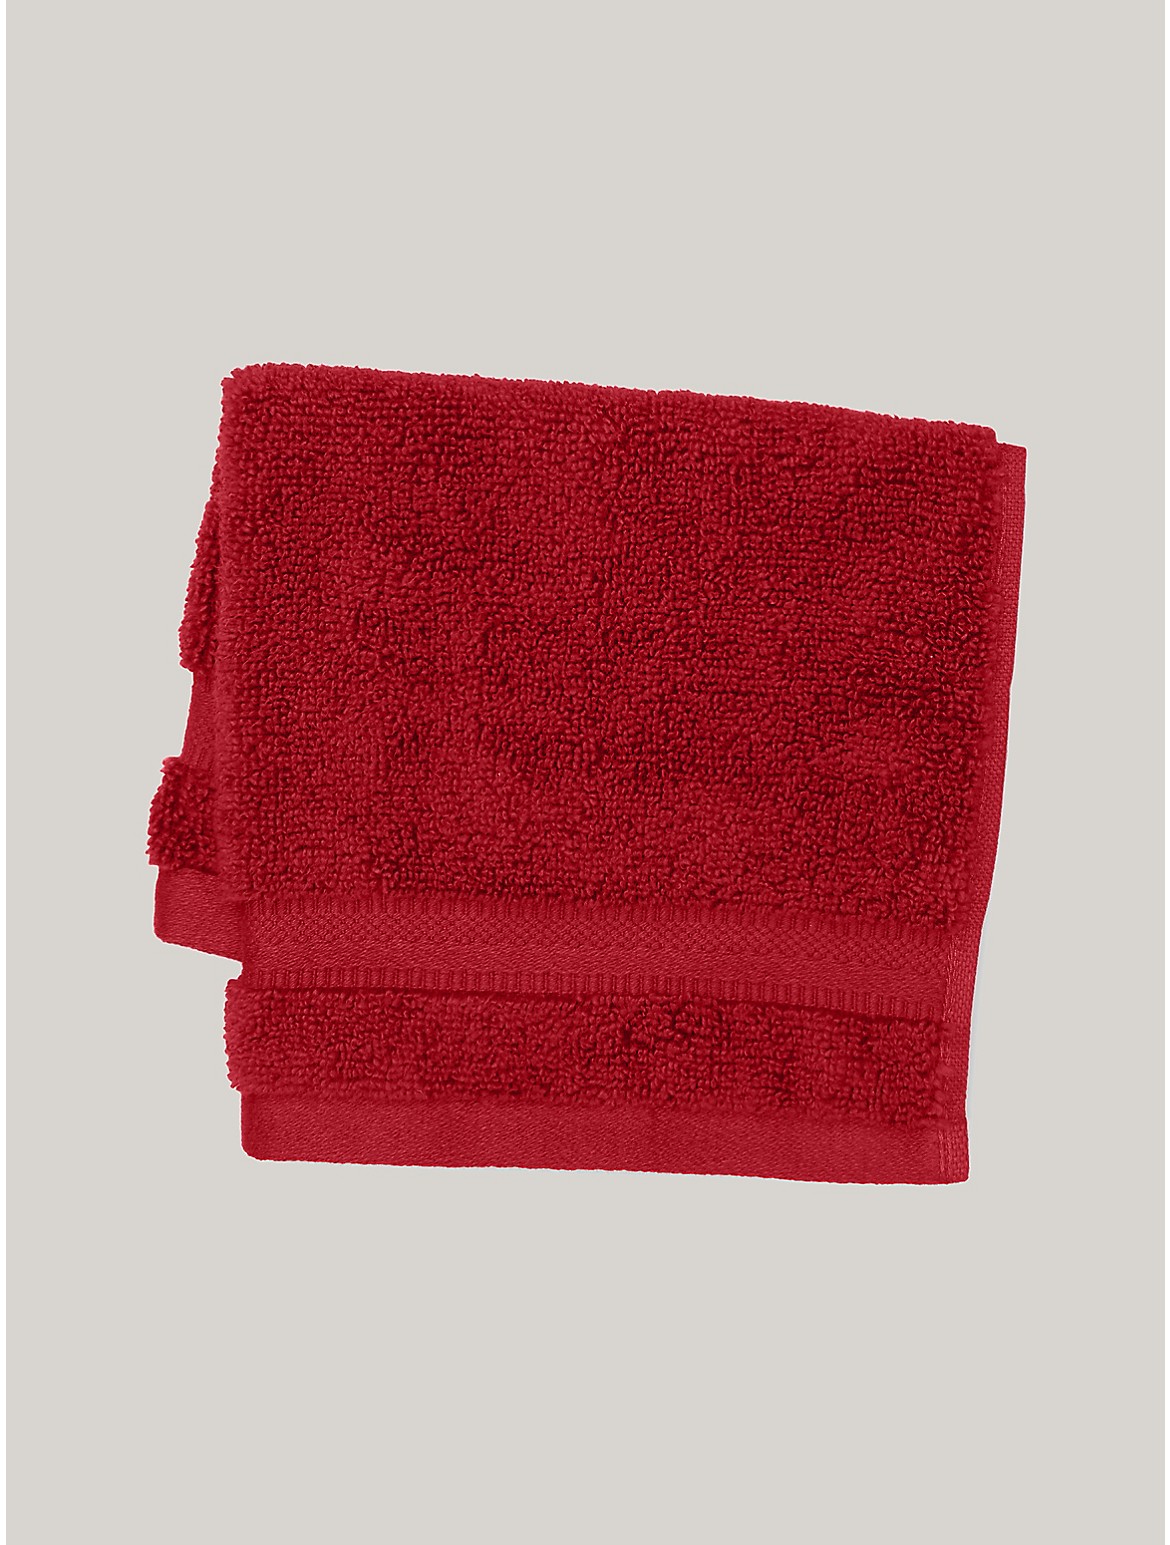 Tommy Hilfiger Signature Solid Washcloth in Biking Red - Red